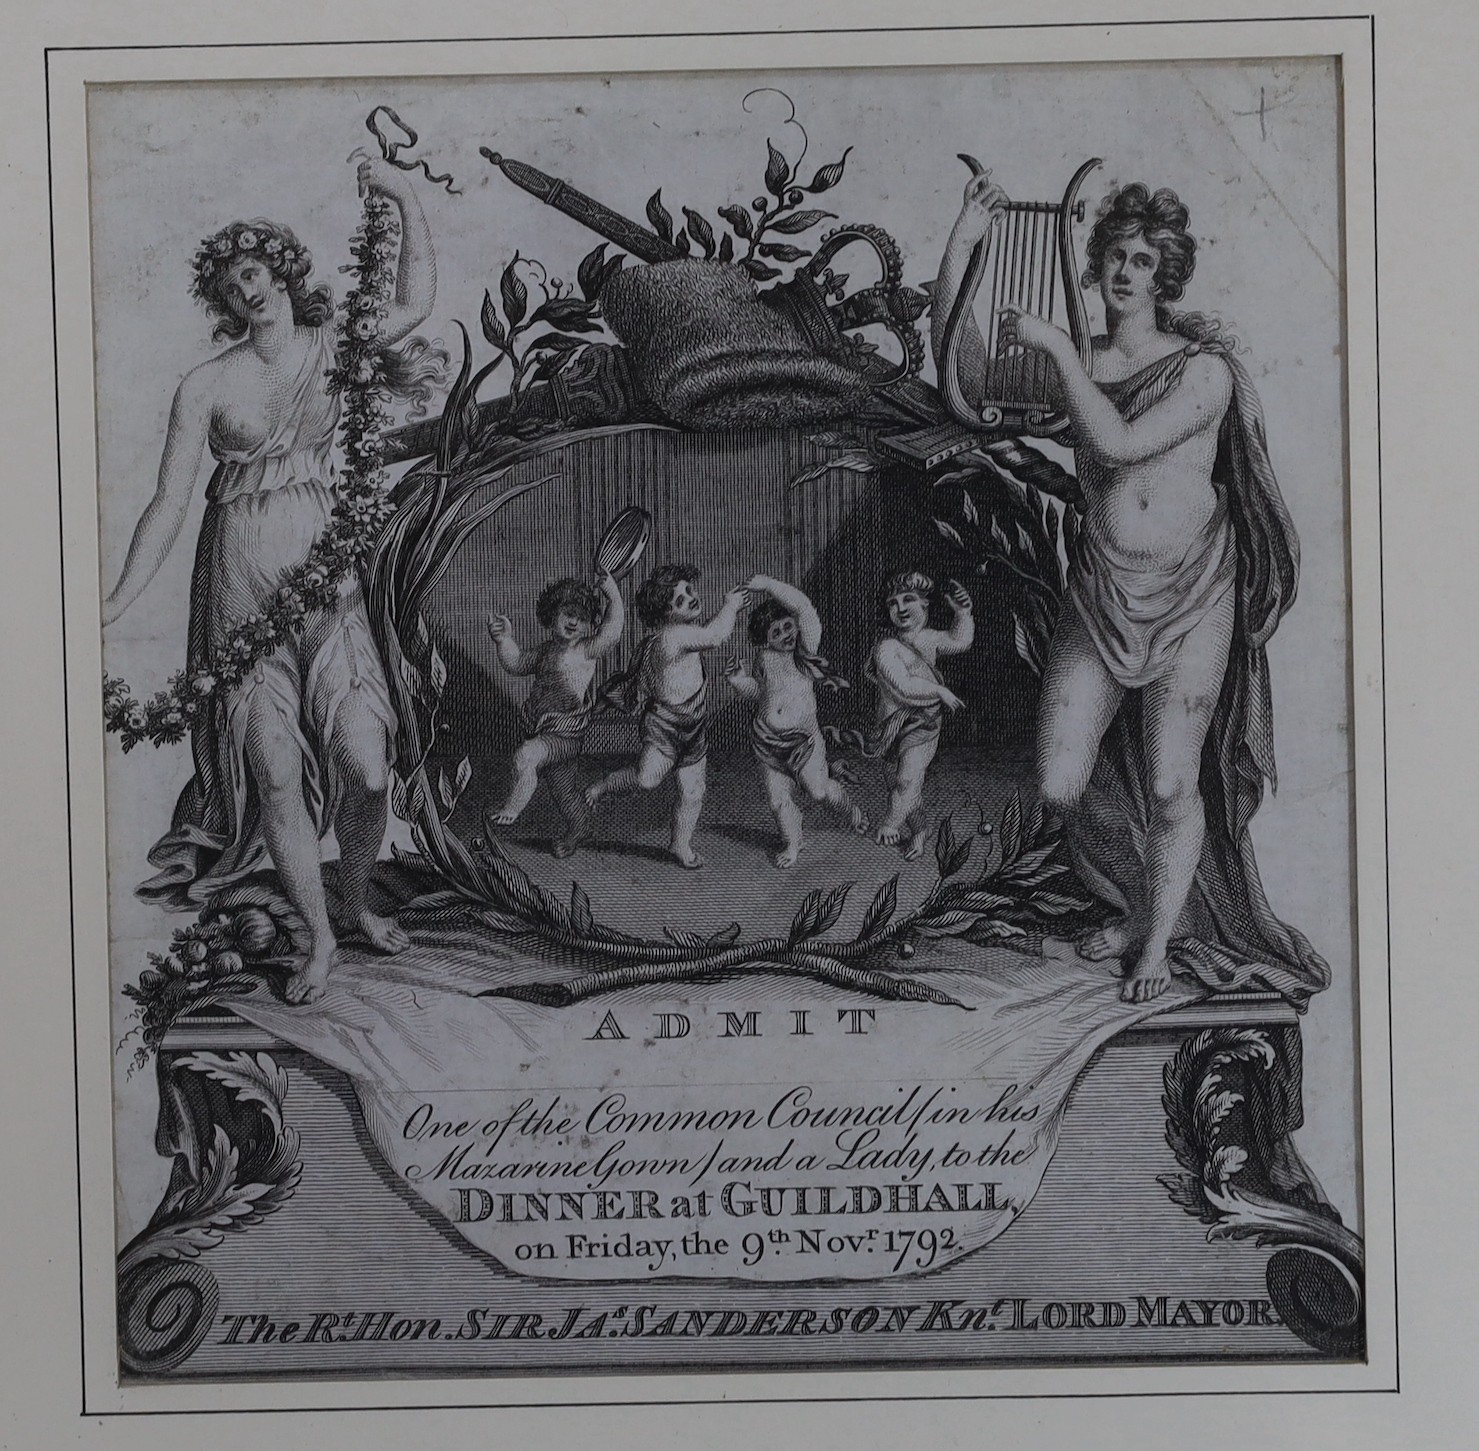 A late 18th century engraving; Admission ticket for Dinner at Guildhall on Friday 9th November 1792 from the Rt. Hon. Sir James Sanderson, Lord Mayor of London, 17 x 16cm